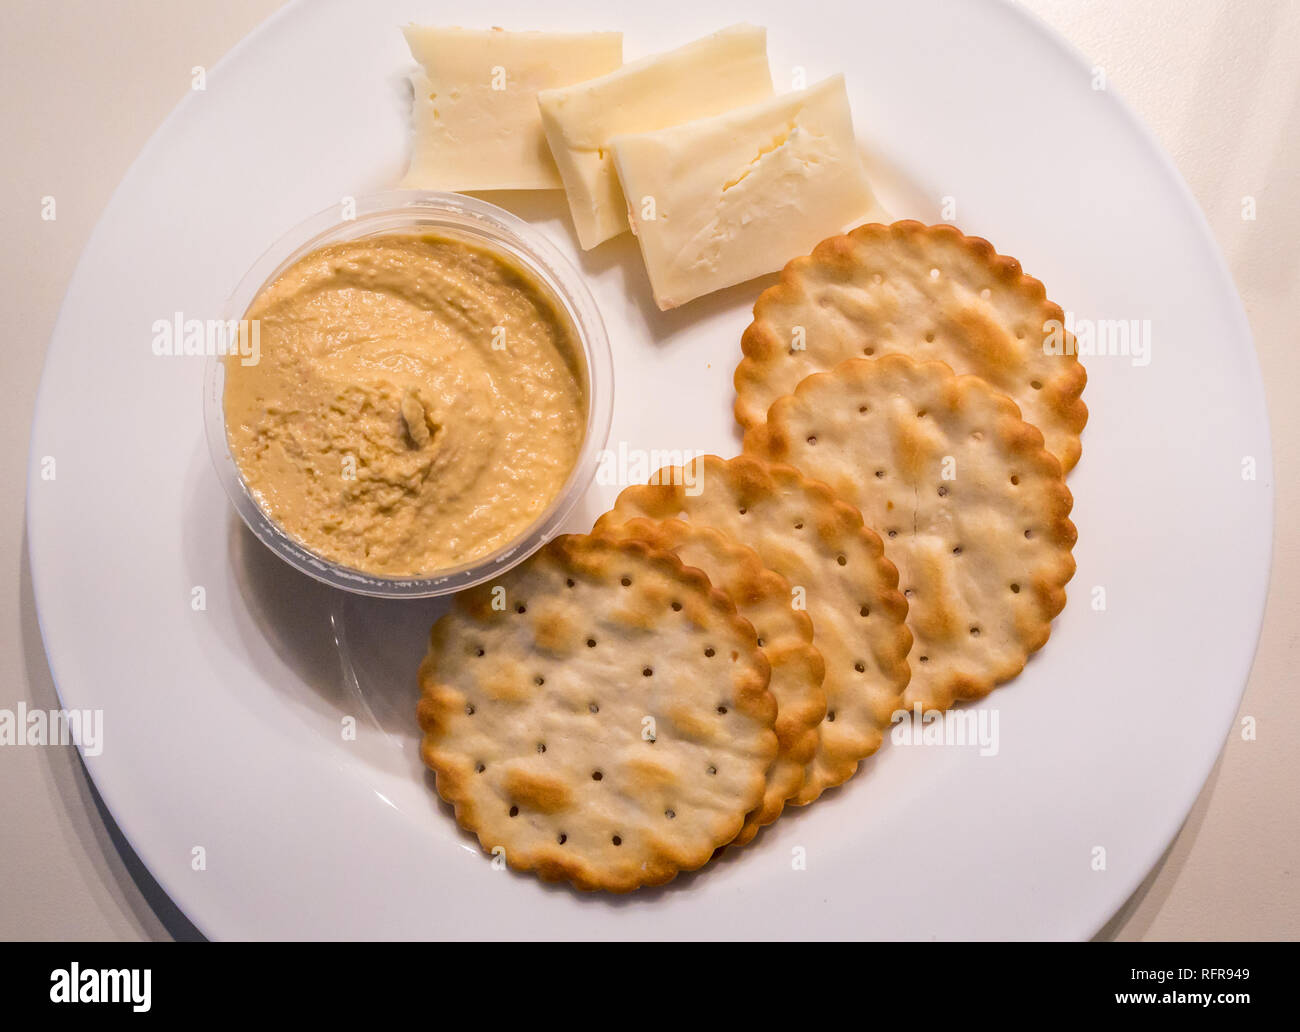 Close up of white plate with snack of round crackers, hummus and  cheddar cheese Stock Photo